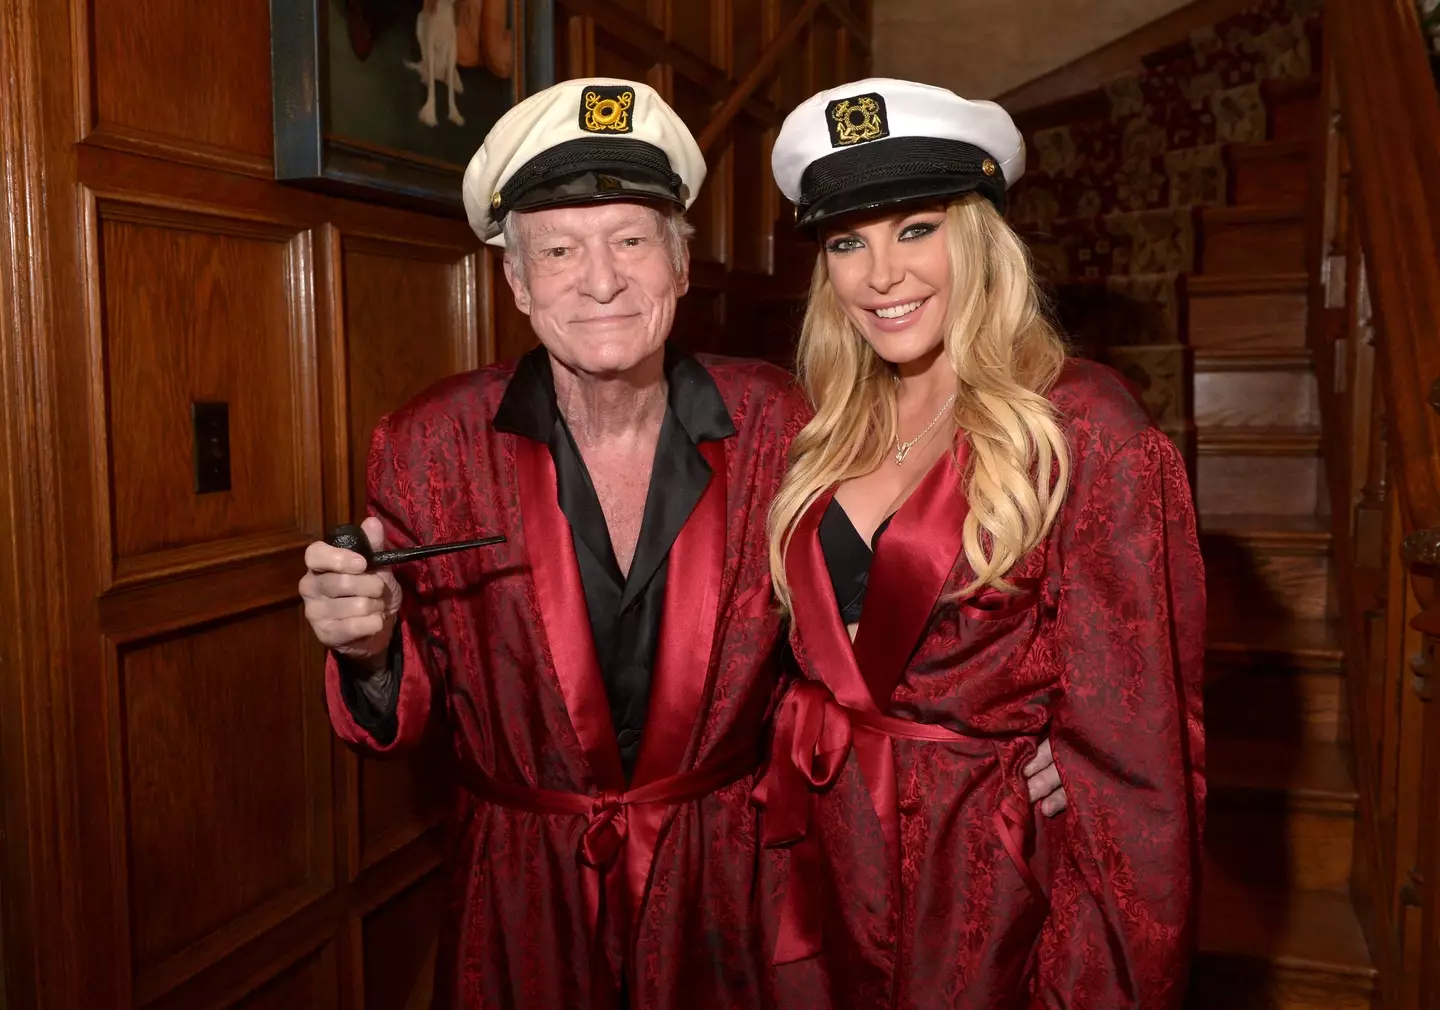 Some of the other residents of the Playboy Mansion told different stories and made accusations against Hugh Hefner.